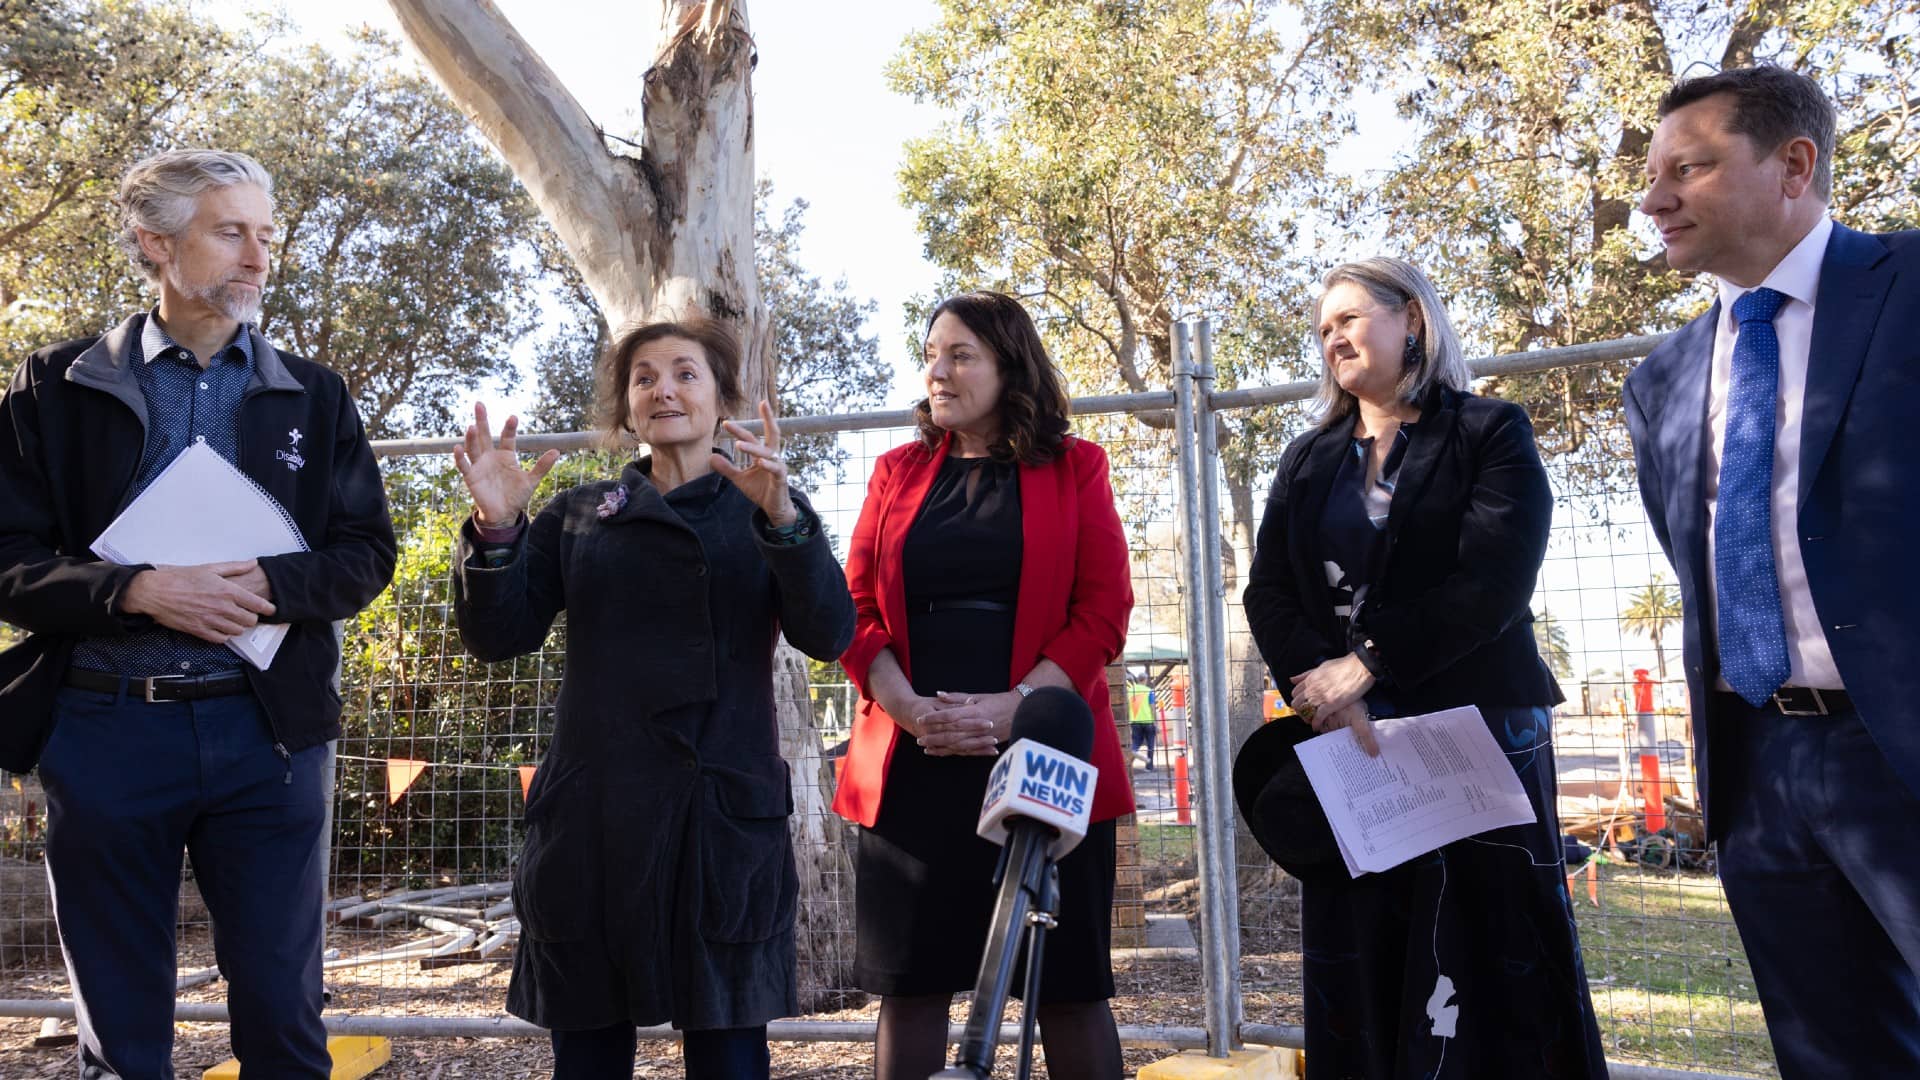 Dr Shoshana Dreyfus, second from left, with a representative from The Disability Trust, MP Alison Byrne, a representative from Wollongong City Council, and Paul Scully MP. Photo: Mark Newsham